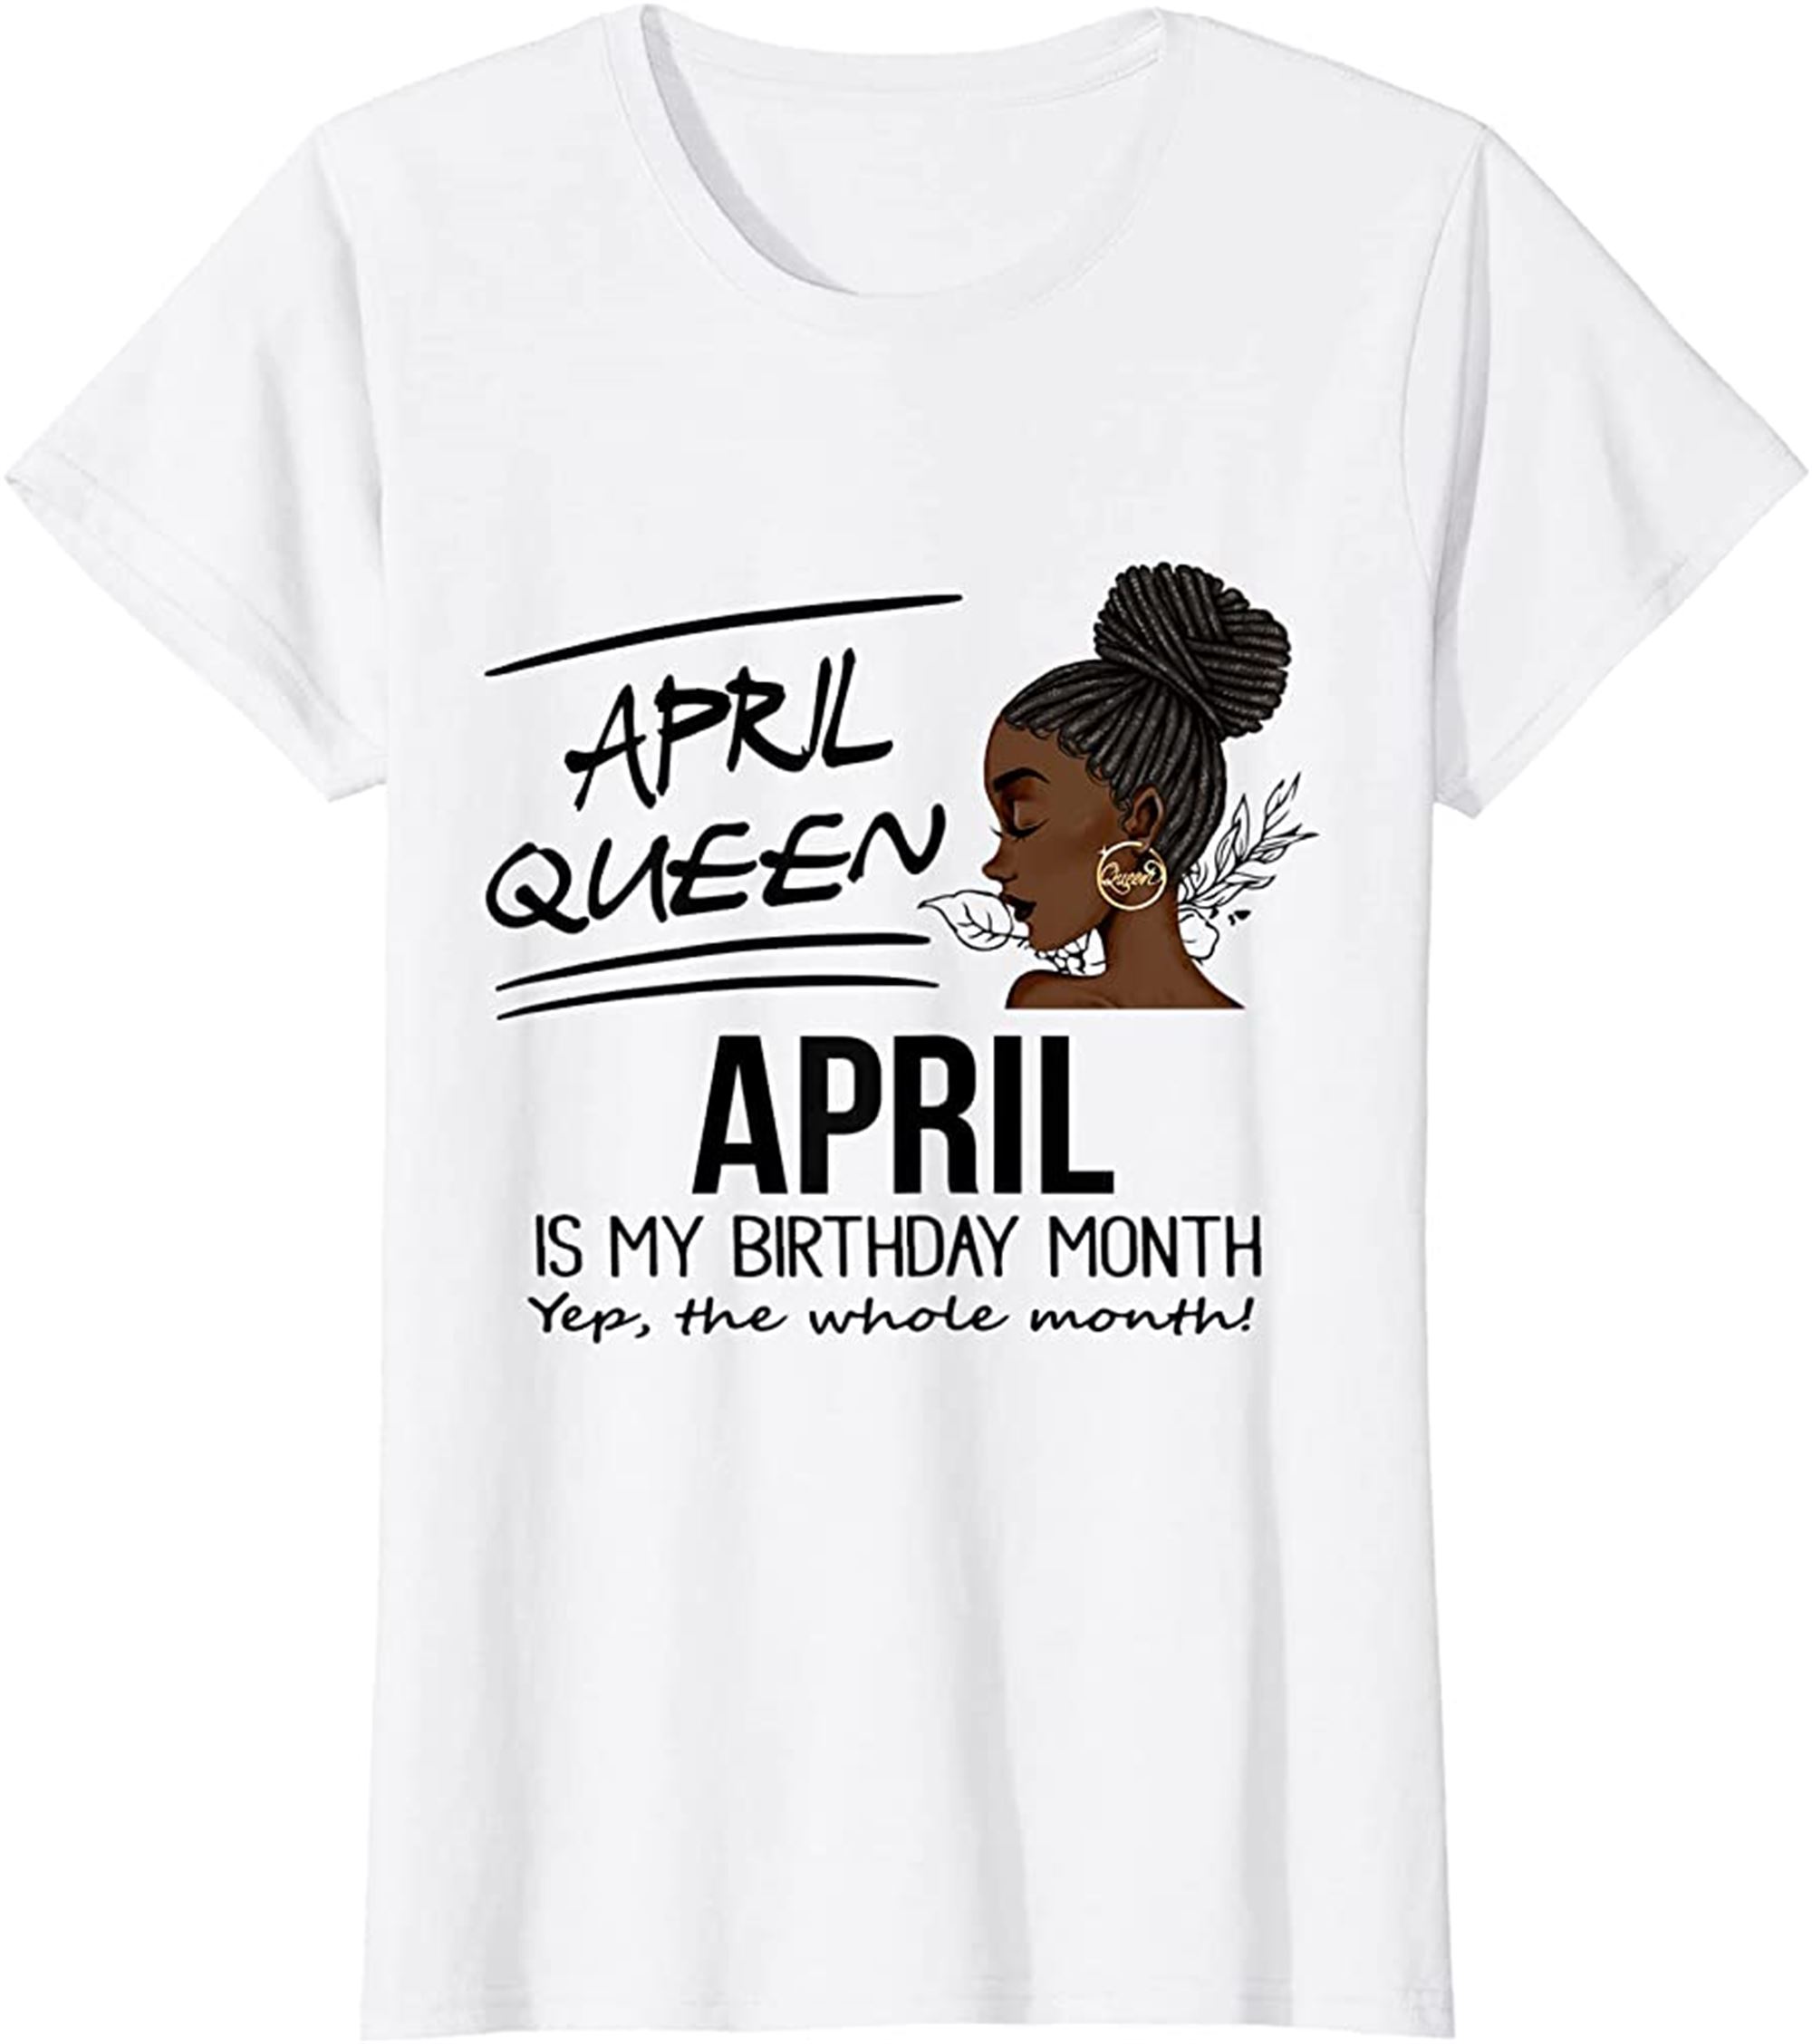 Womens April Queen April Is My Birthday Month Black Girl T-shirt Full Size Up To 5xl